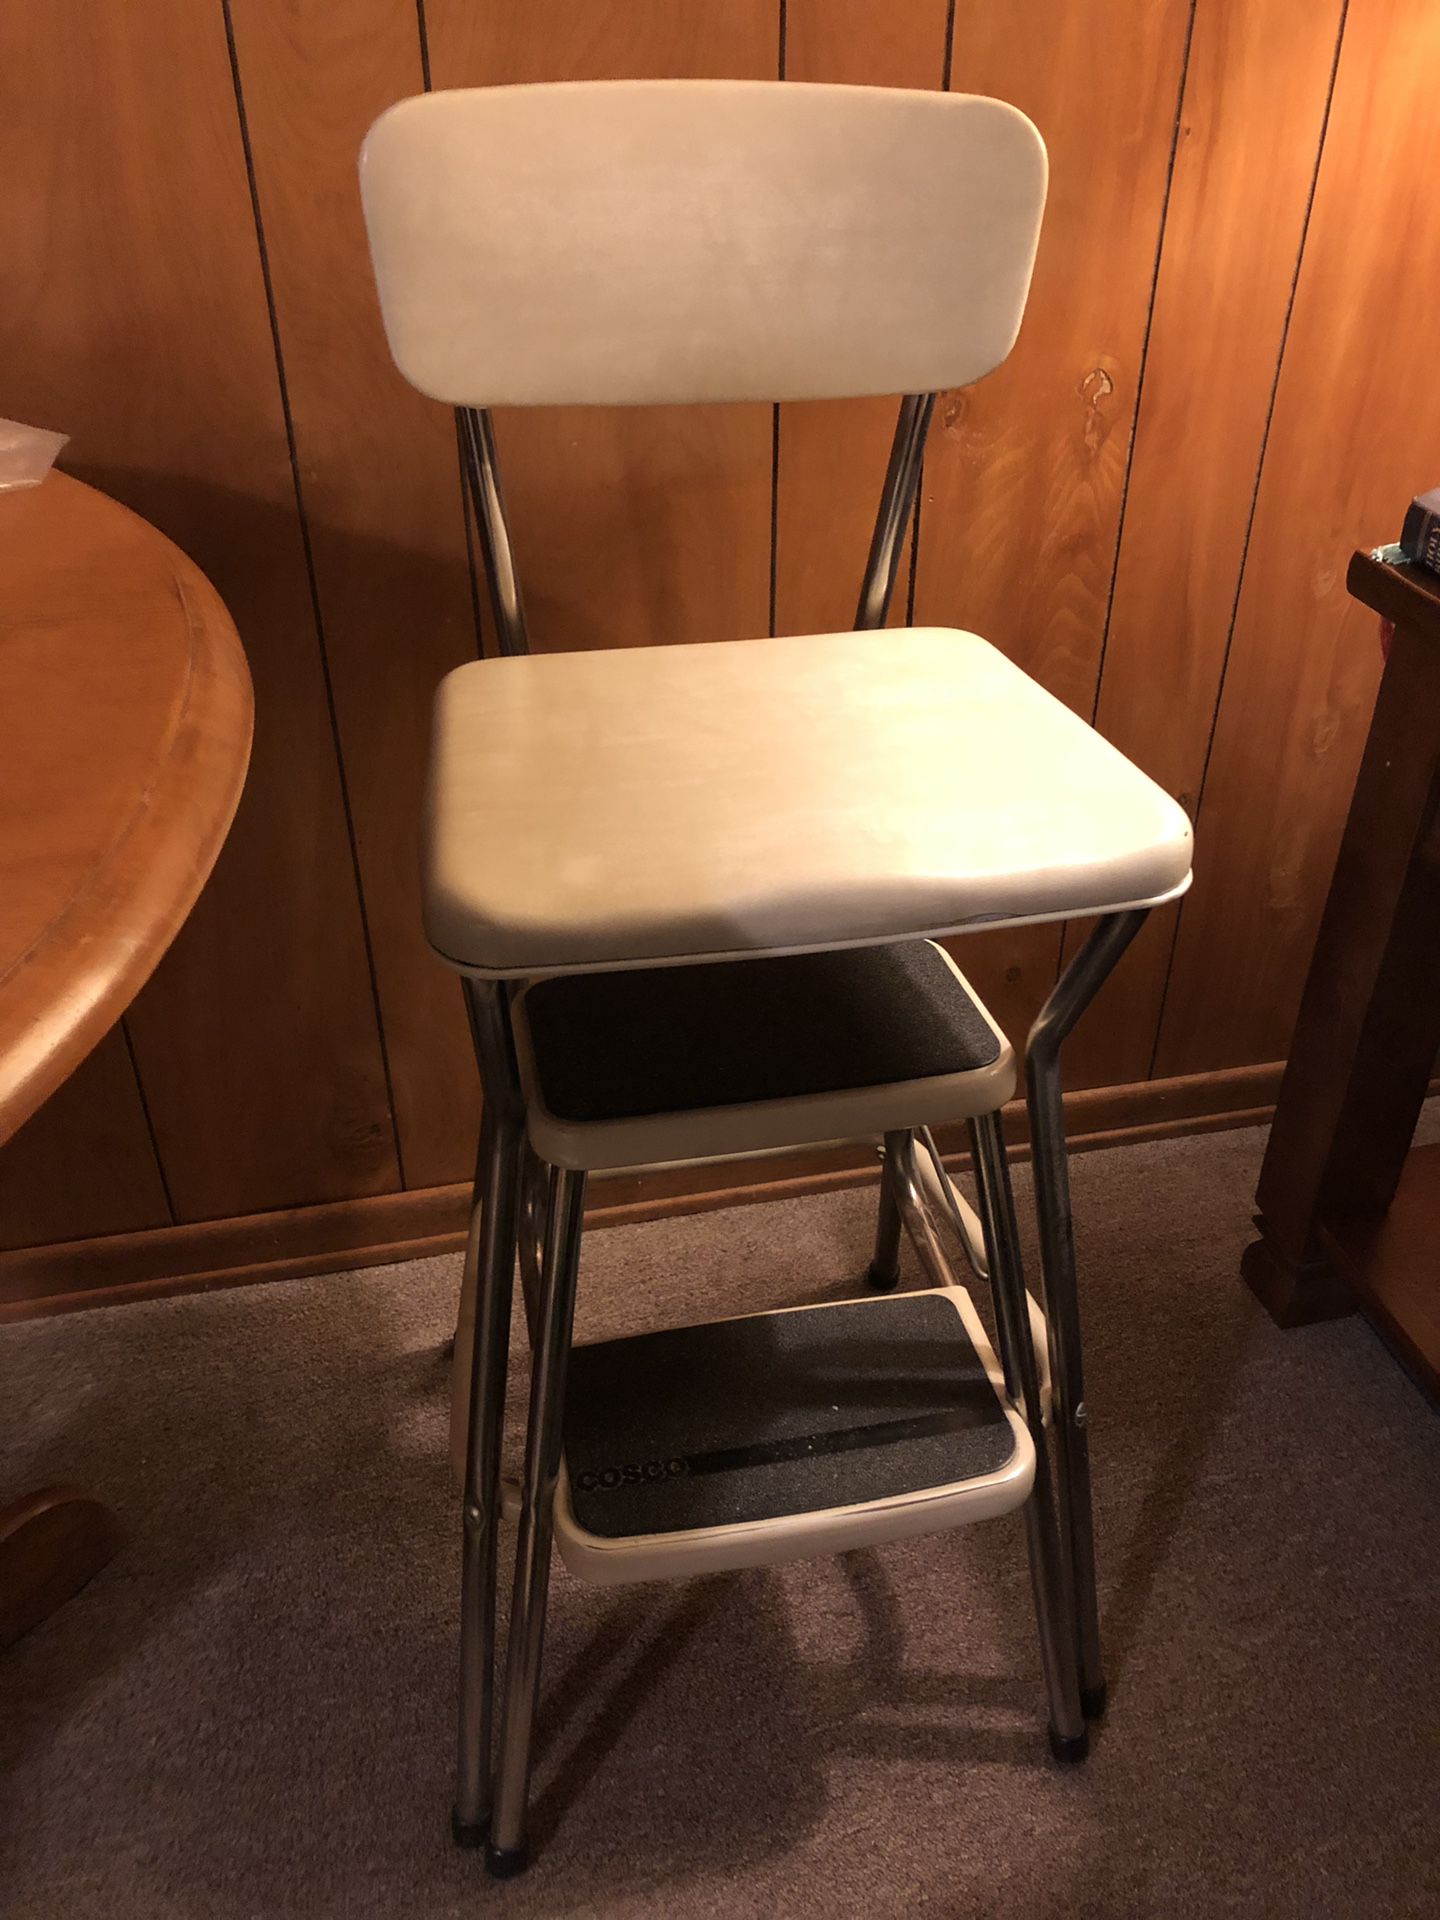 Cosco Counter Chair / Step Stool with Pull-out Steps